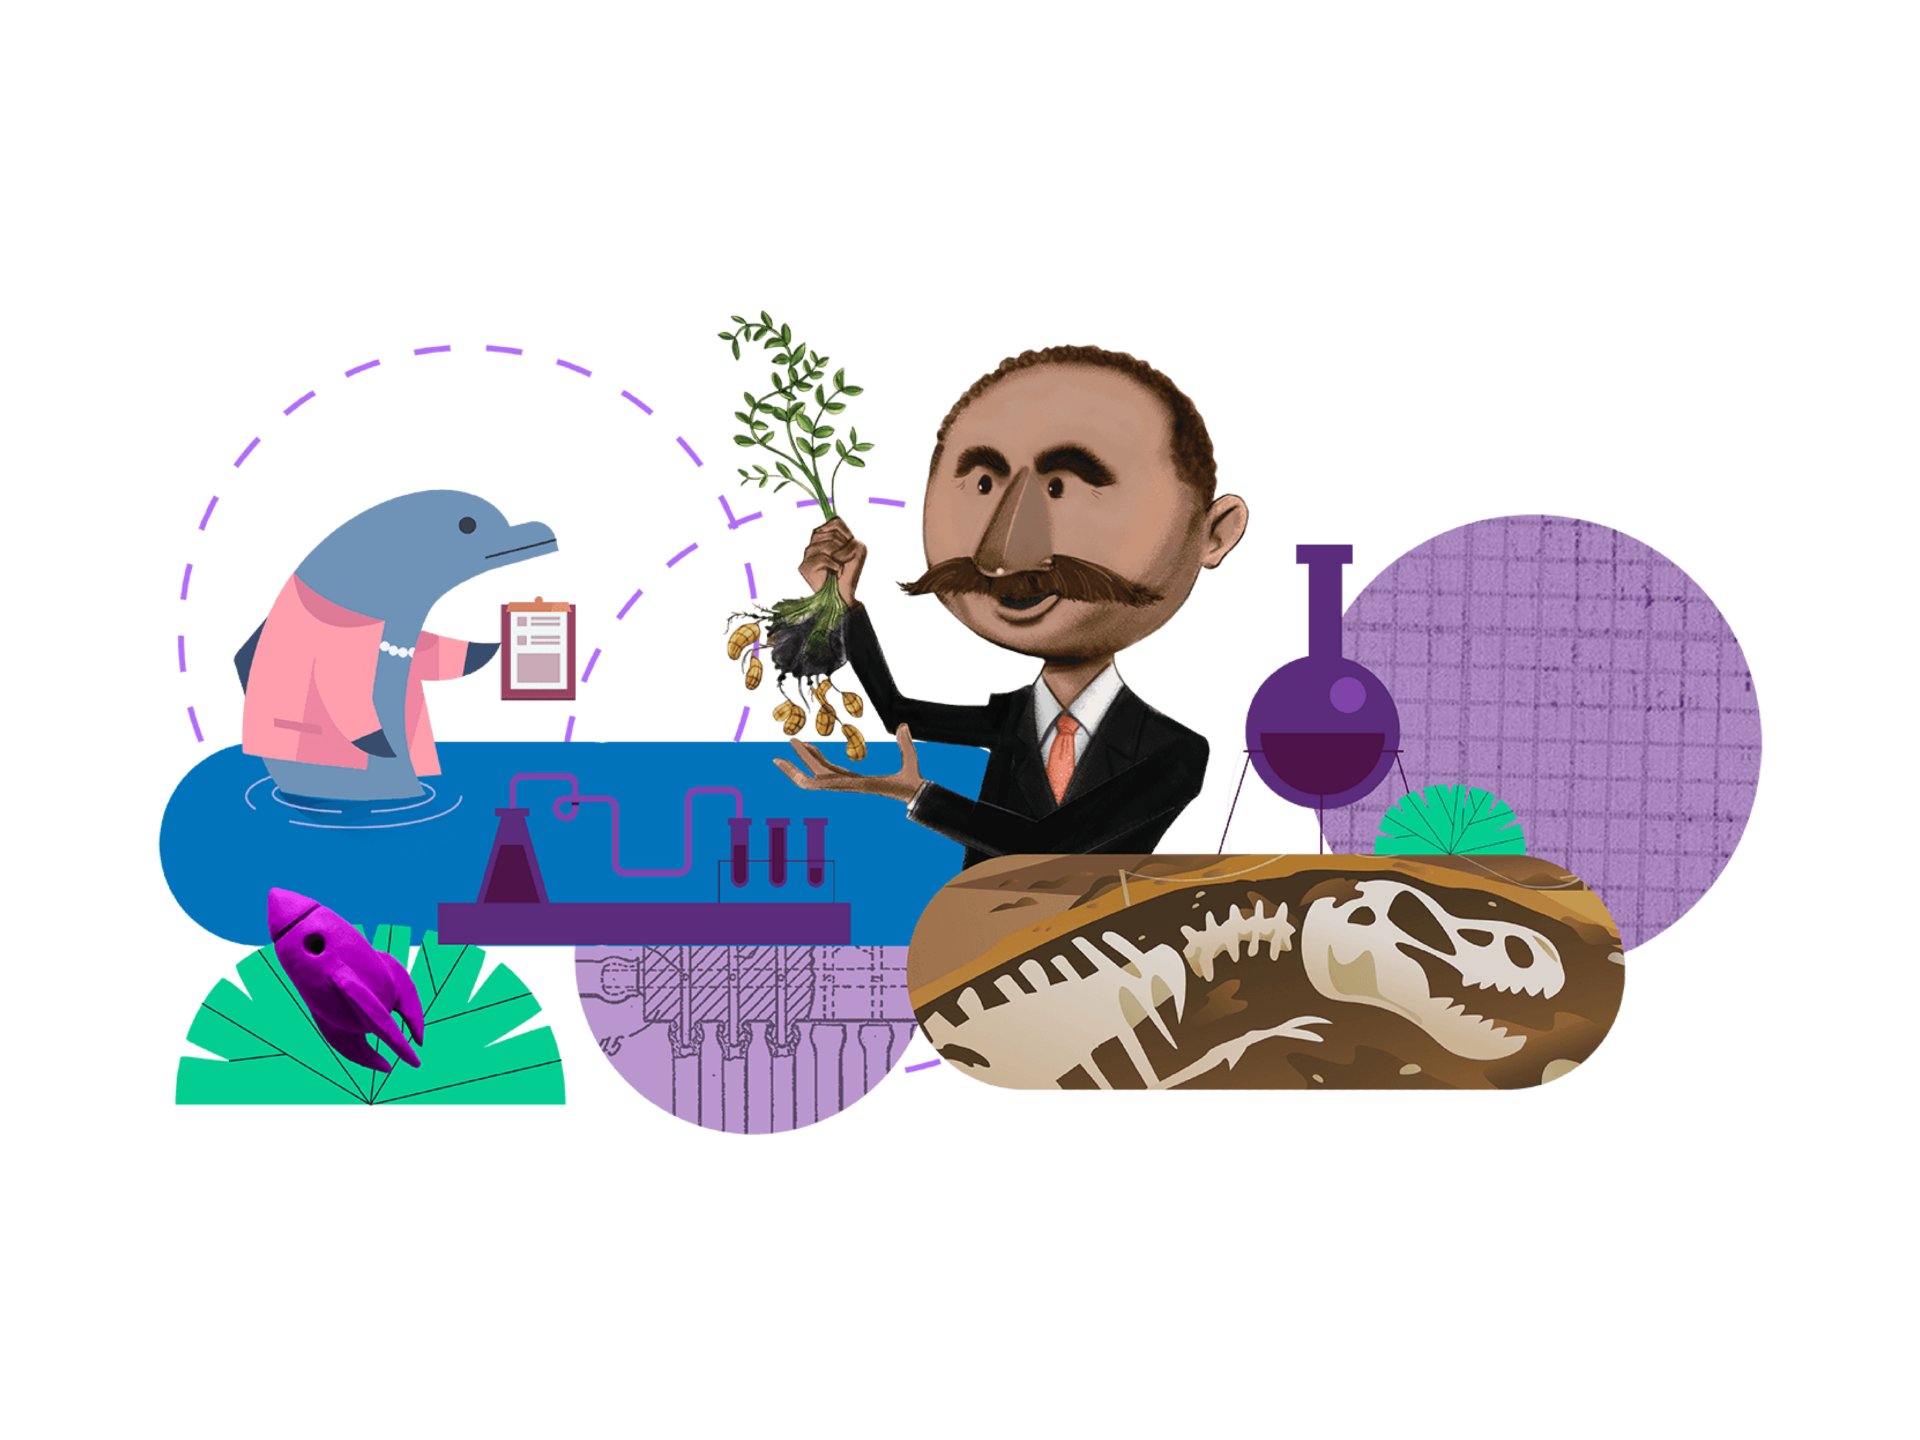 Illustration combining various elements: a man in a suit with a tree sapling, stylized animals, scientific equipment from Amplify CKLA, and a fossil, overlaid with geometric shapes.